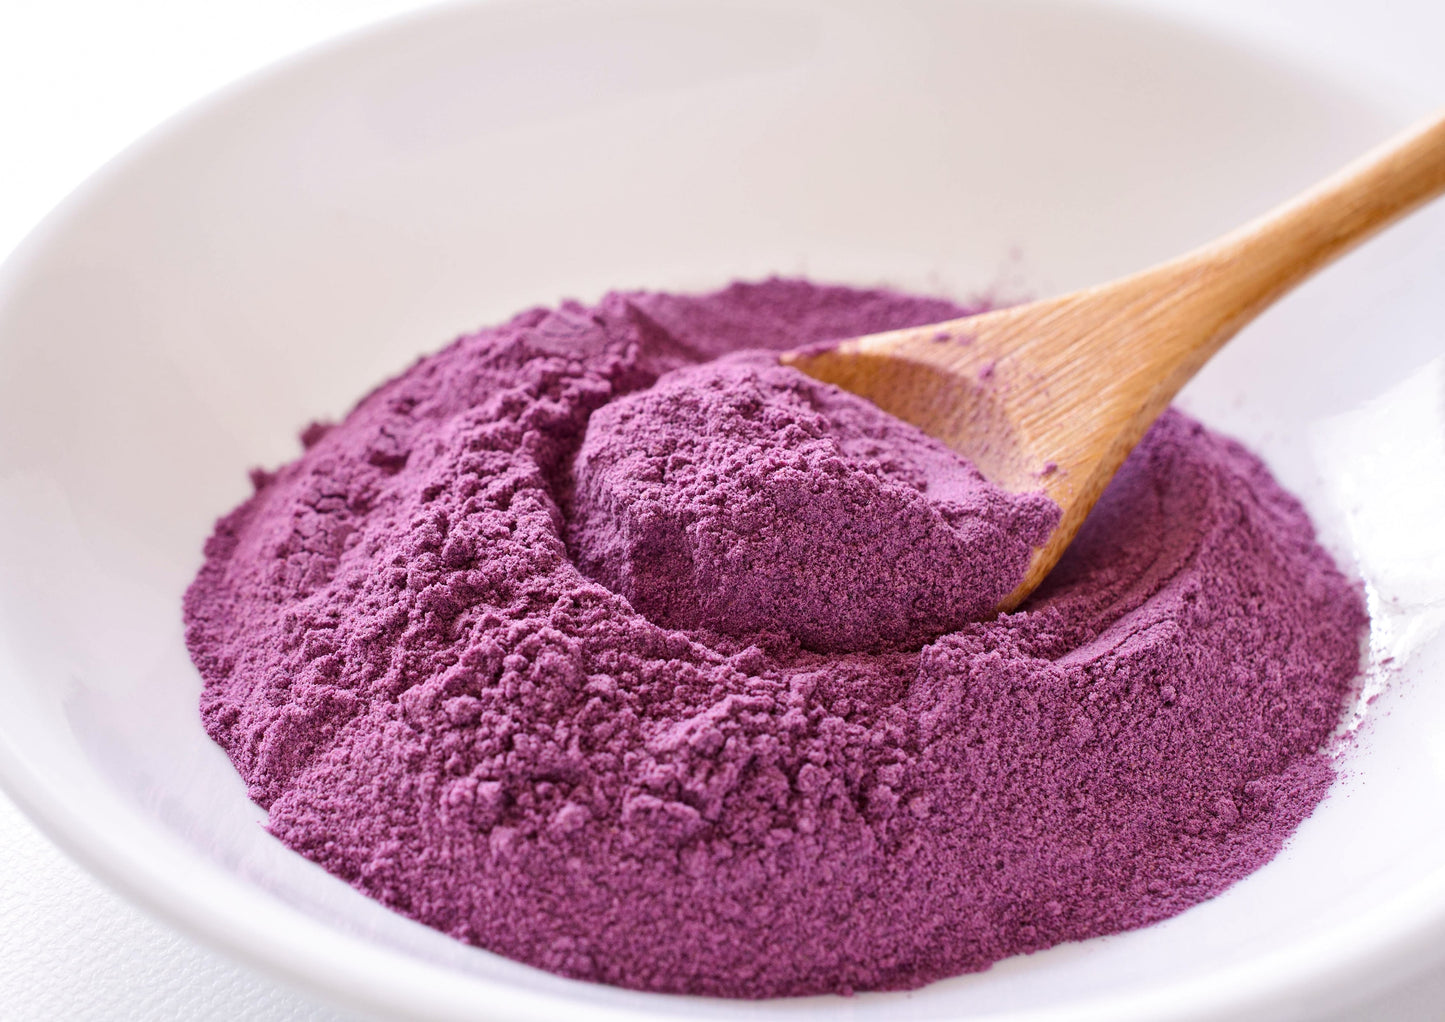 Purple Sweet Potato Powder –100% Pure, Dried Raw Purple Yam Ube Powder Alternative, No Sugar Added, Vegan Bulk Superfood, Great for Cooking, Baking, Pastries, Desserts, Smoothies, and Food Coloring